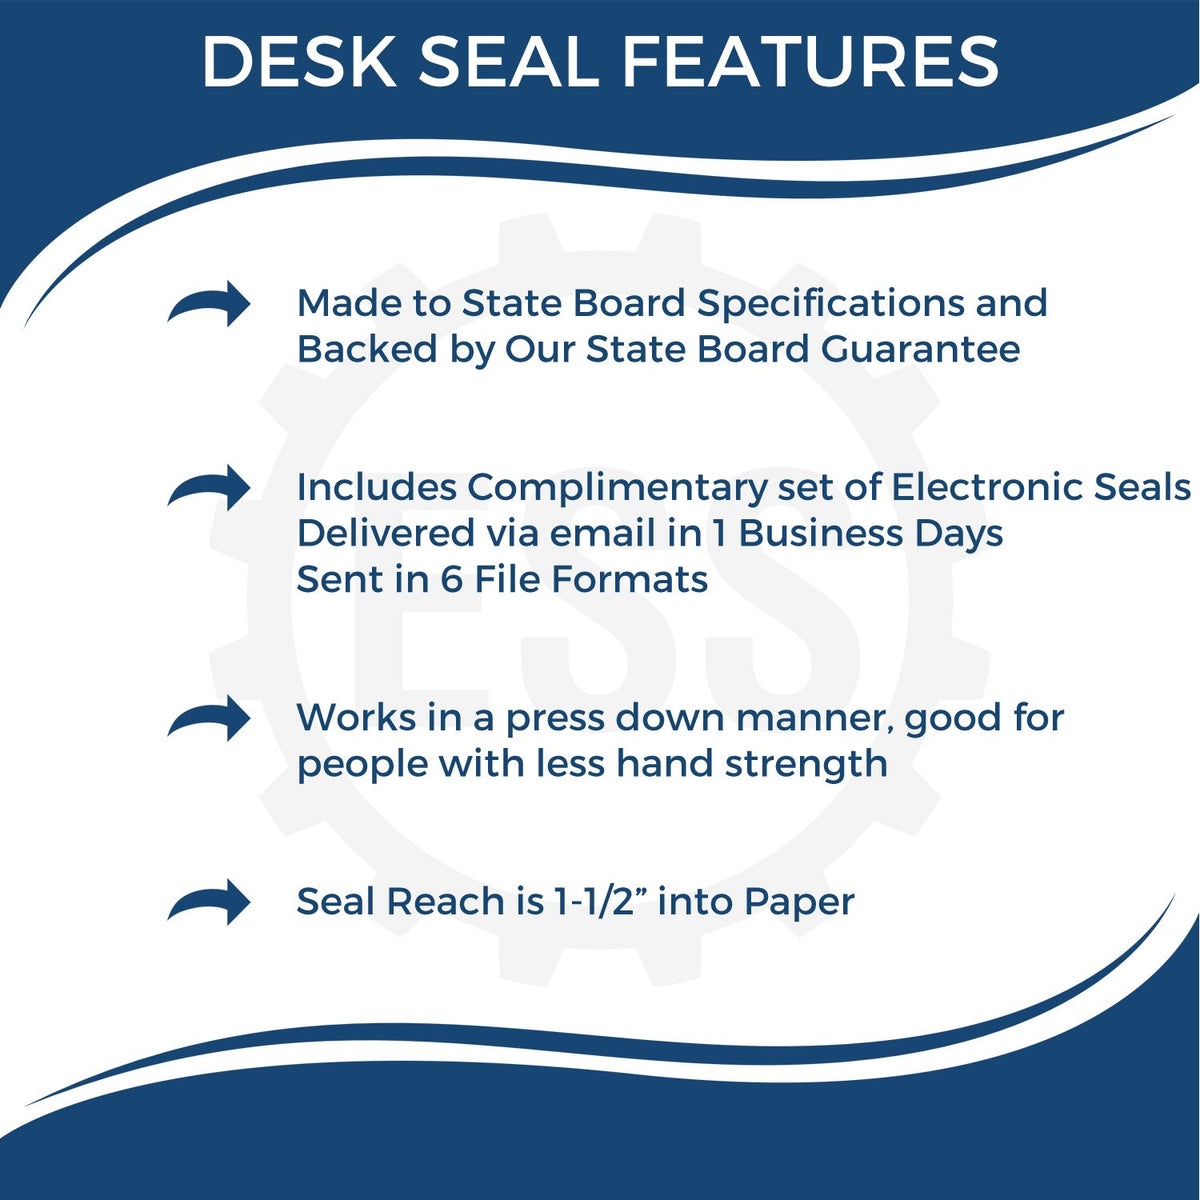 A picture of an infographic highlighting the selling points for the Arkansas Geologist Desk Seal